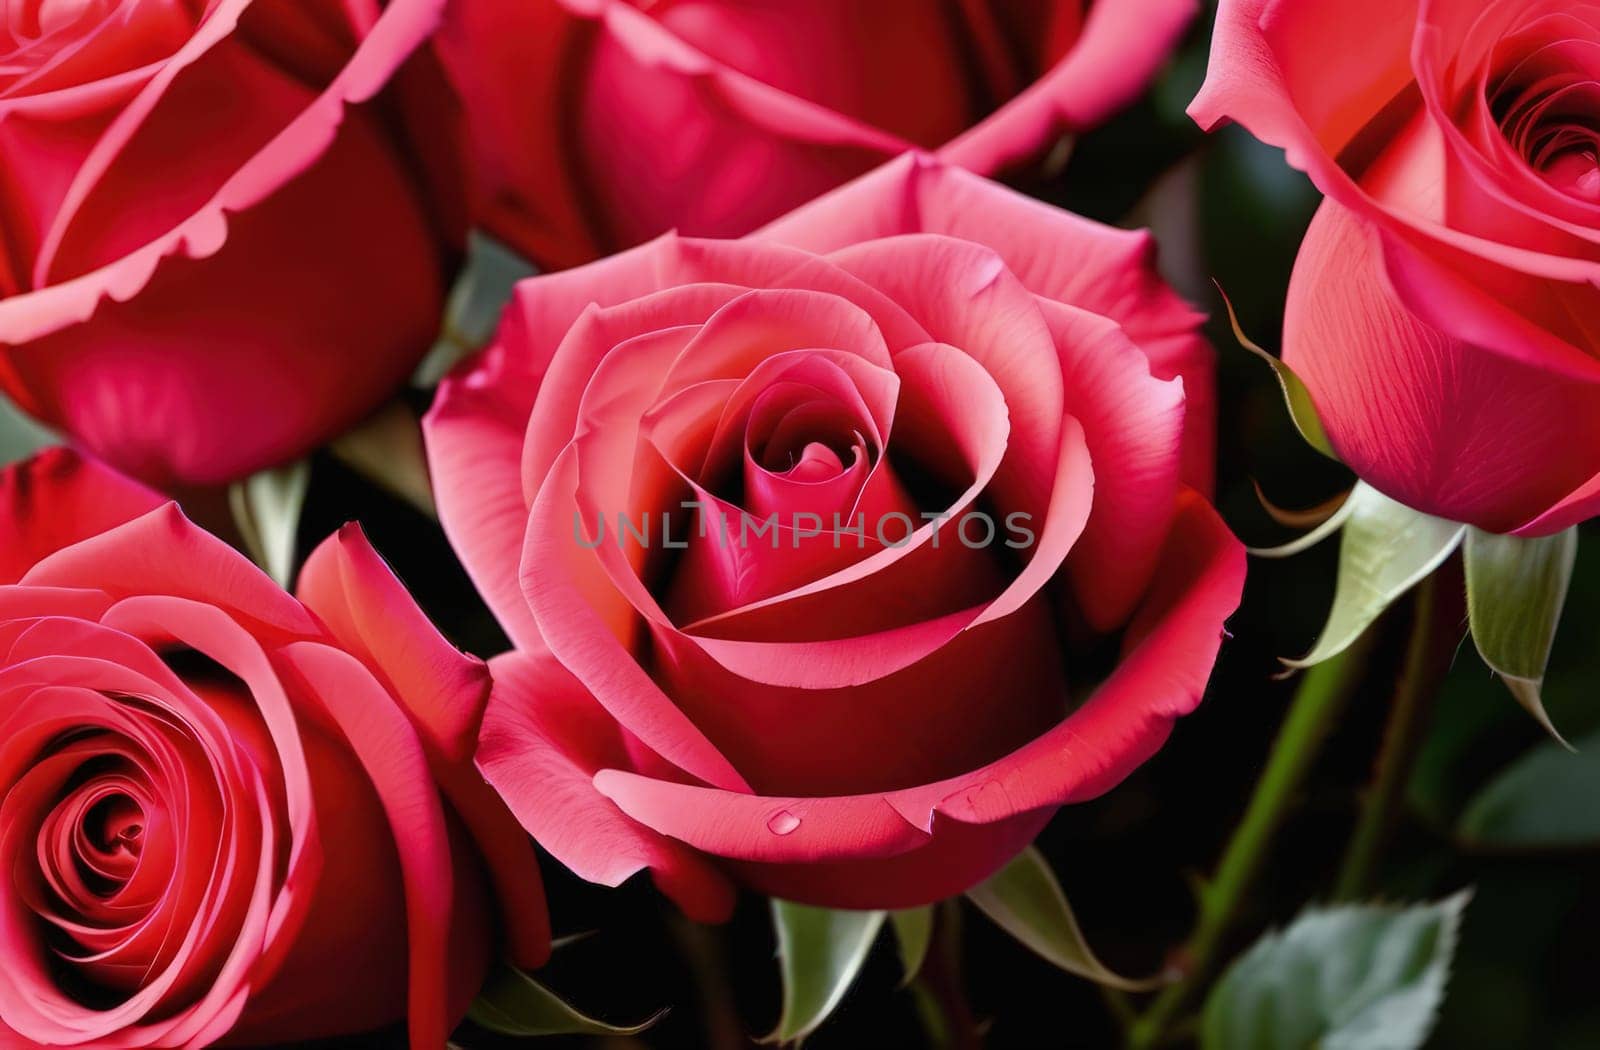 Beautiful banner with red roses background of Mothers, Valentine Day, Birthday, Anniversary, Wedding. Copy space. For advertisement, greeting card mockup, presentation, header, poster, website, print. by Angelsmoon